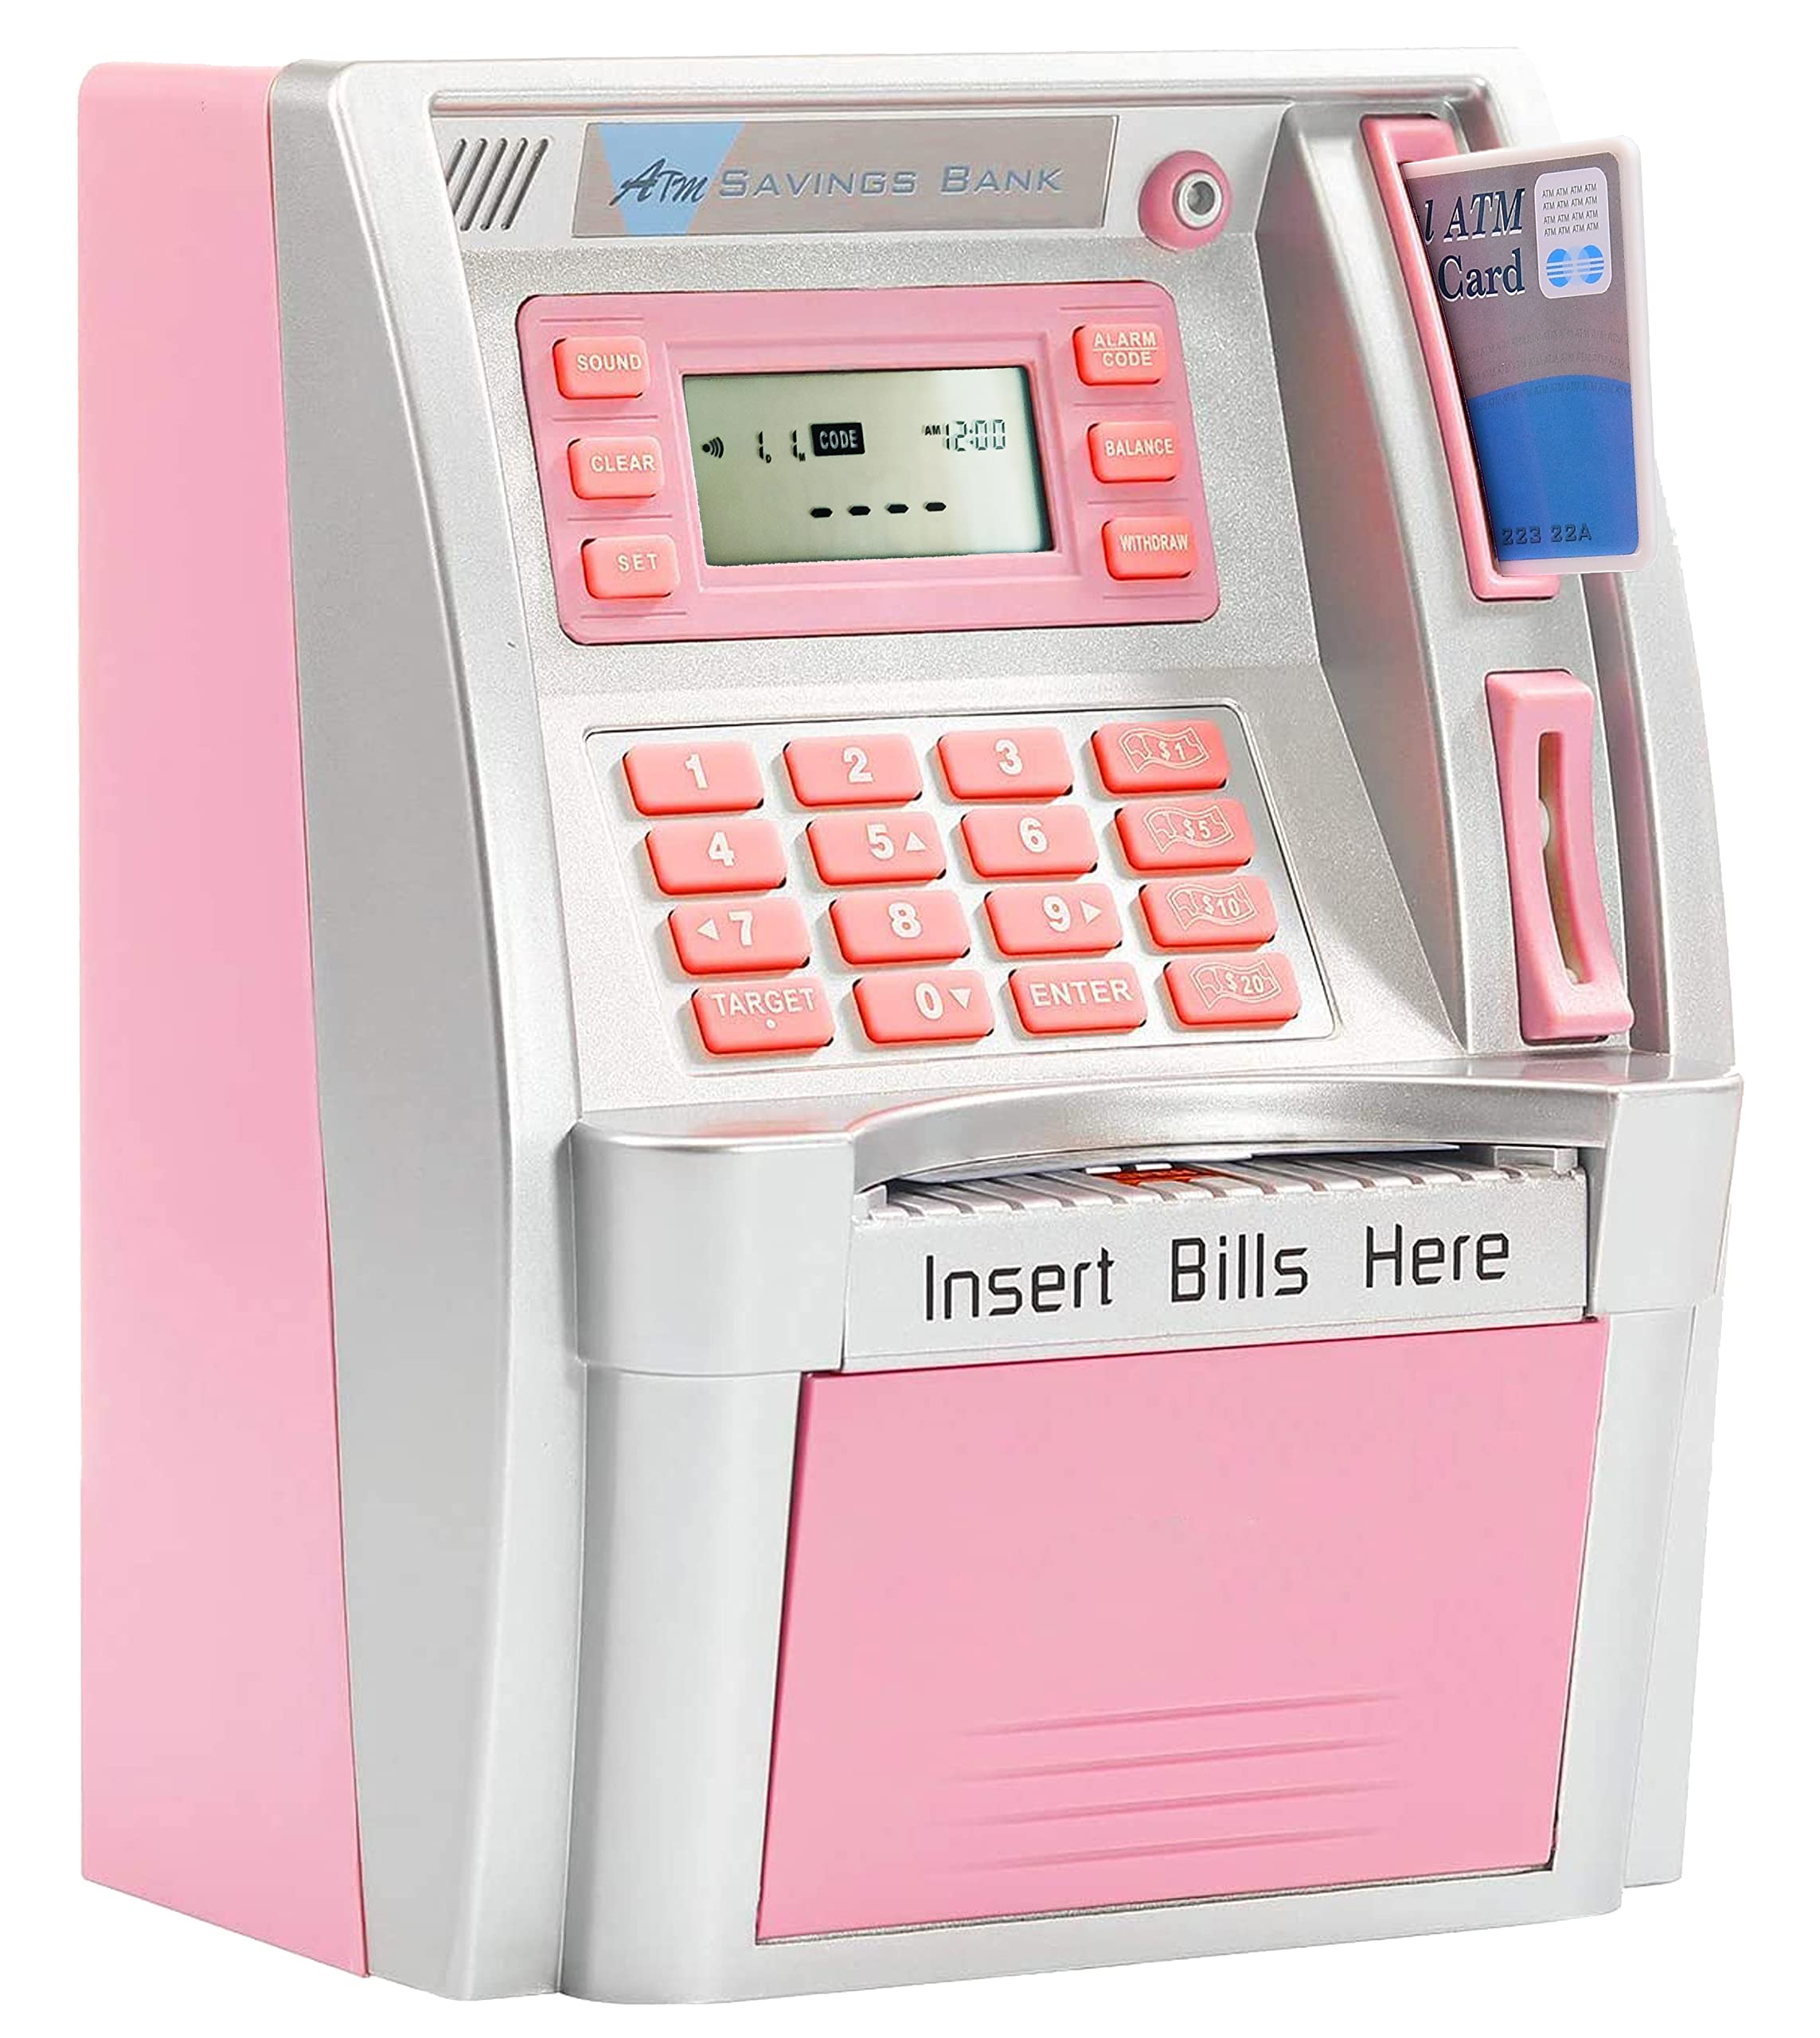 goodsFederation 2022 Upgraded-ATM Savings Bank, Mini Money Bank Machine for Real Money with Debit card, coin Recognition,Balance